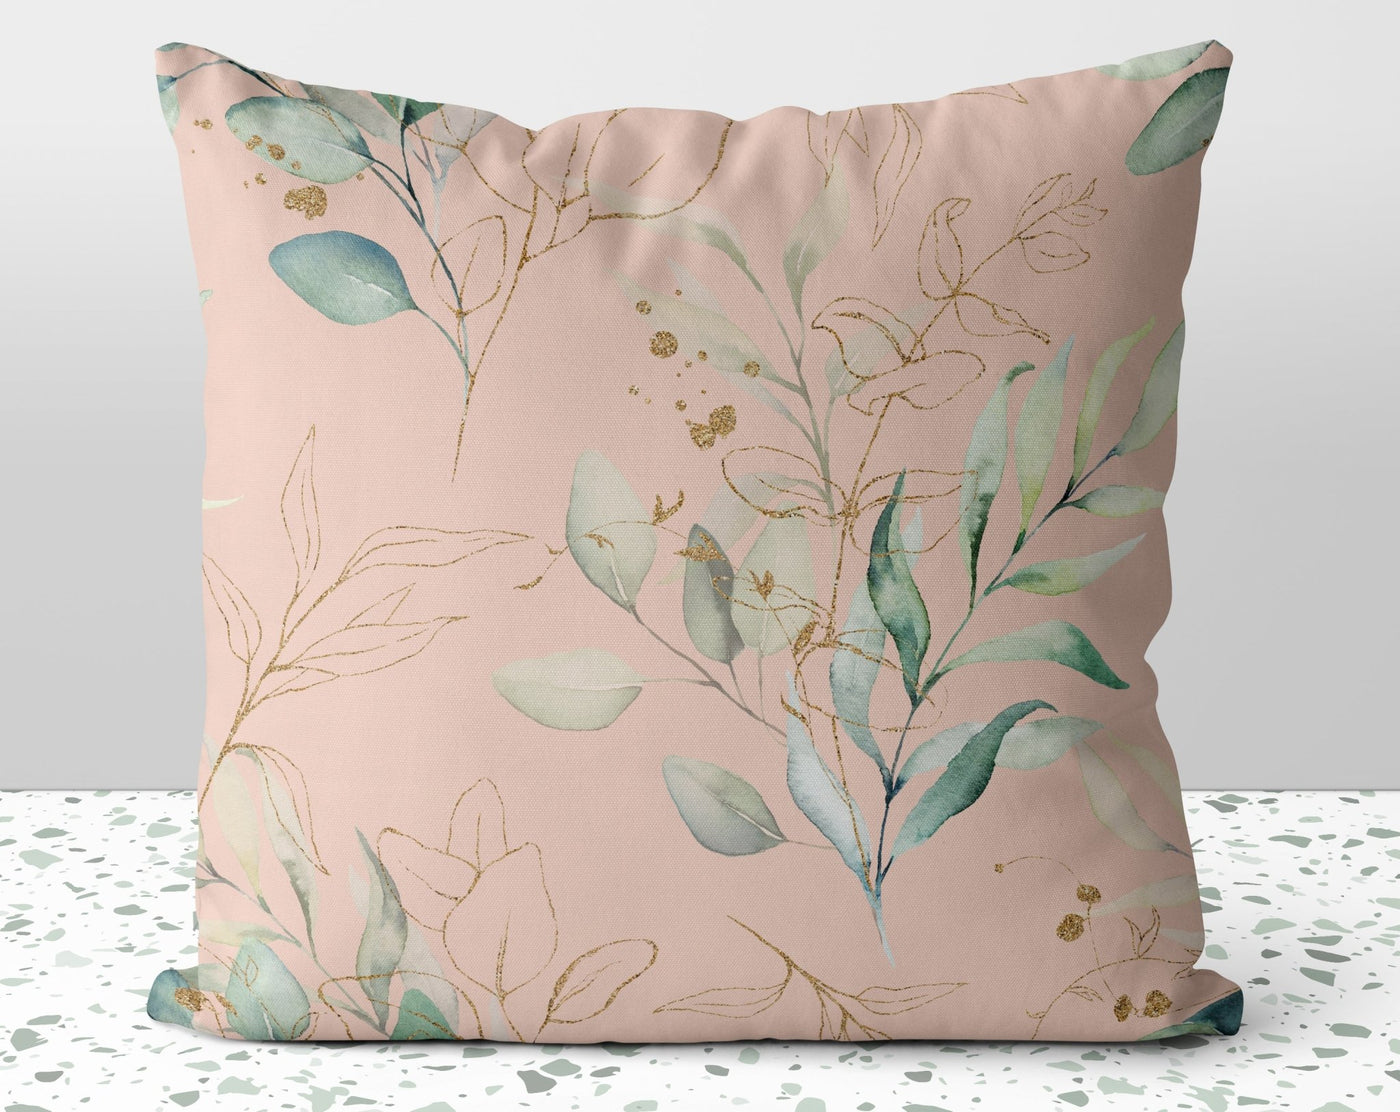 Calm Eucalyptus Leaves on Pink Blush Pillow Throw Cover